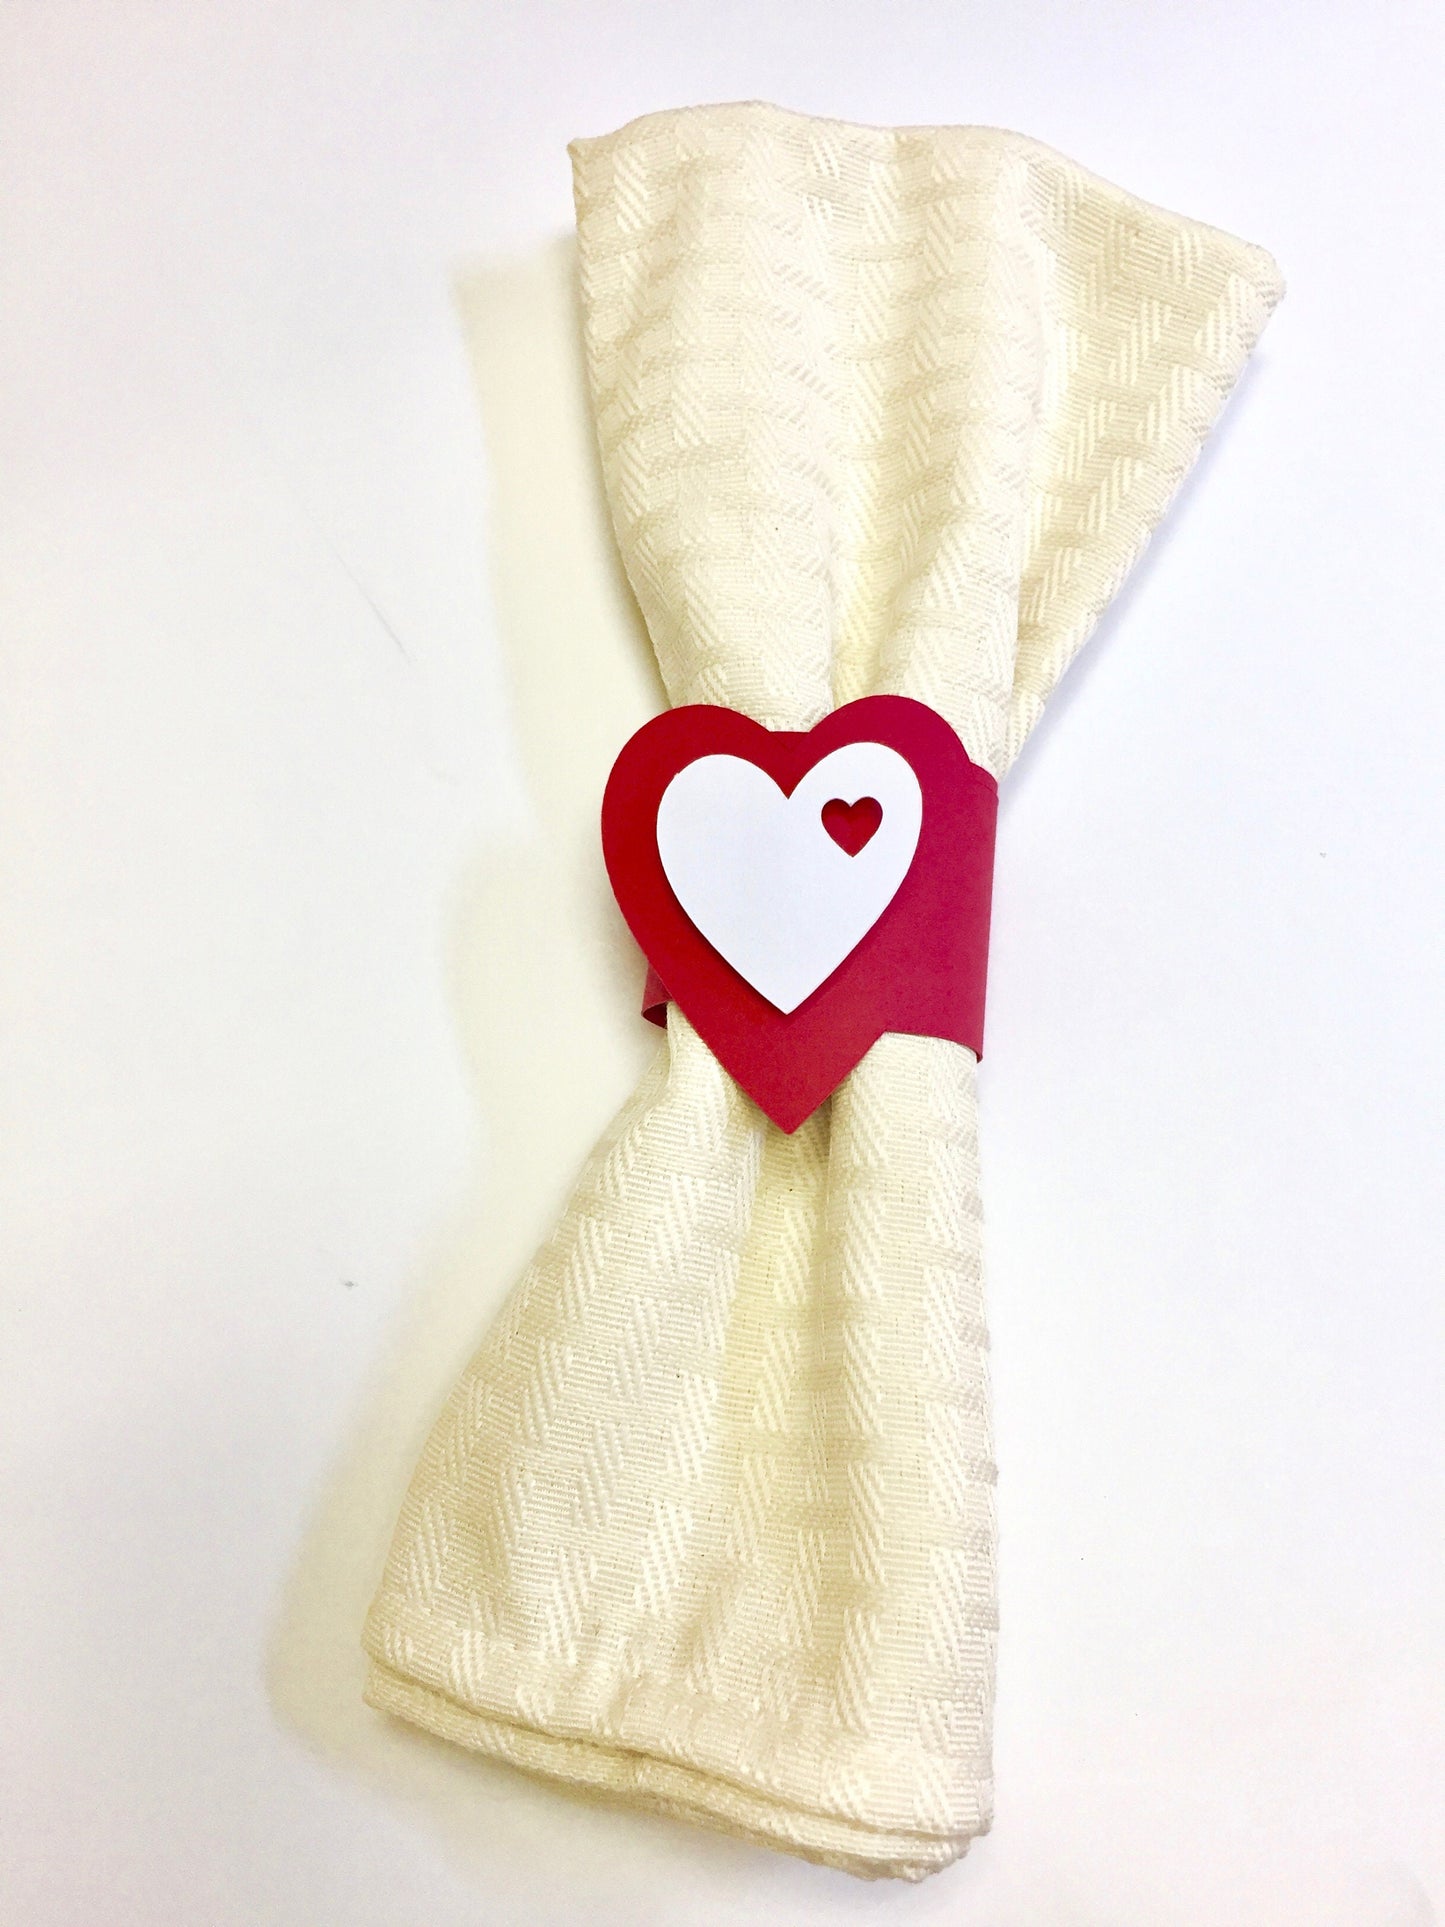 Large Heart Party Decor Napkin Rings  Red Set of 6